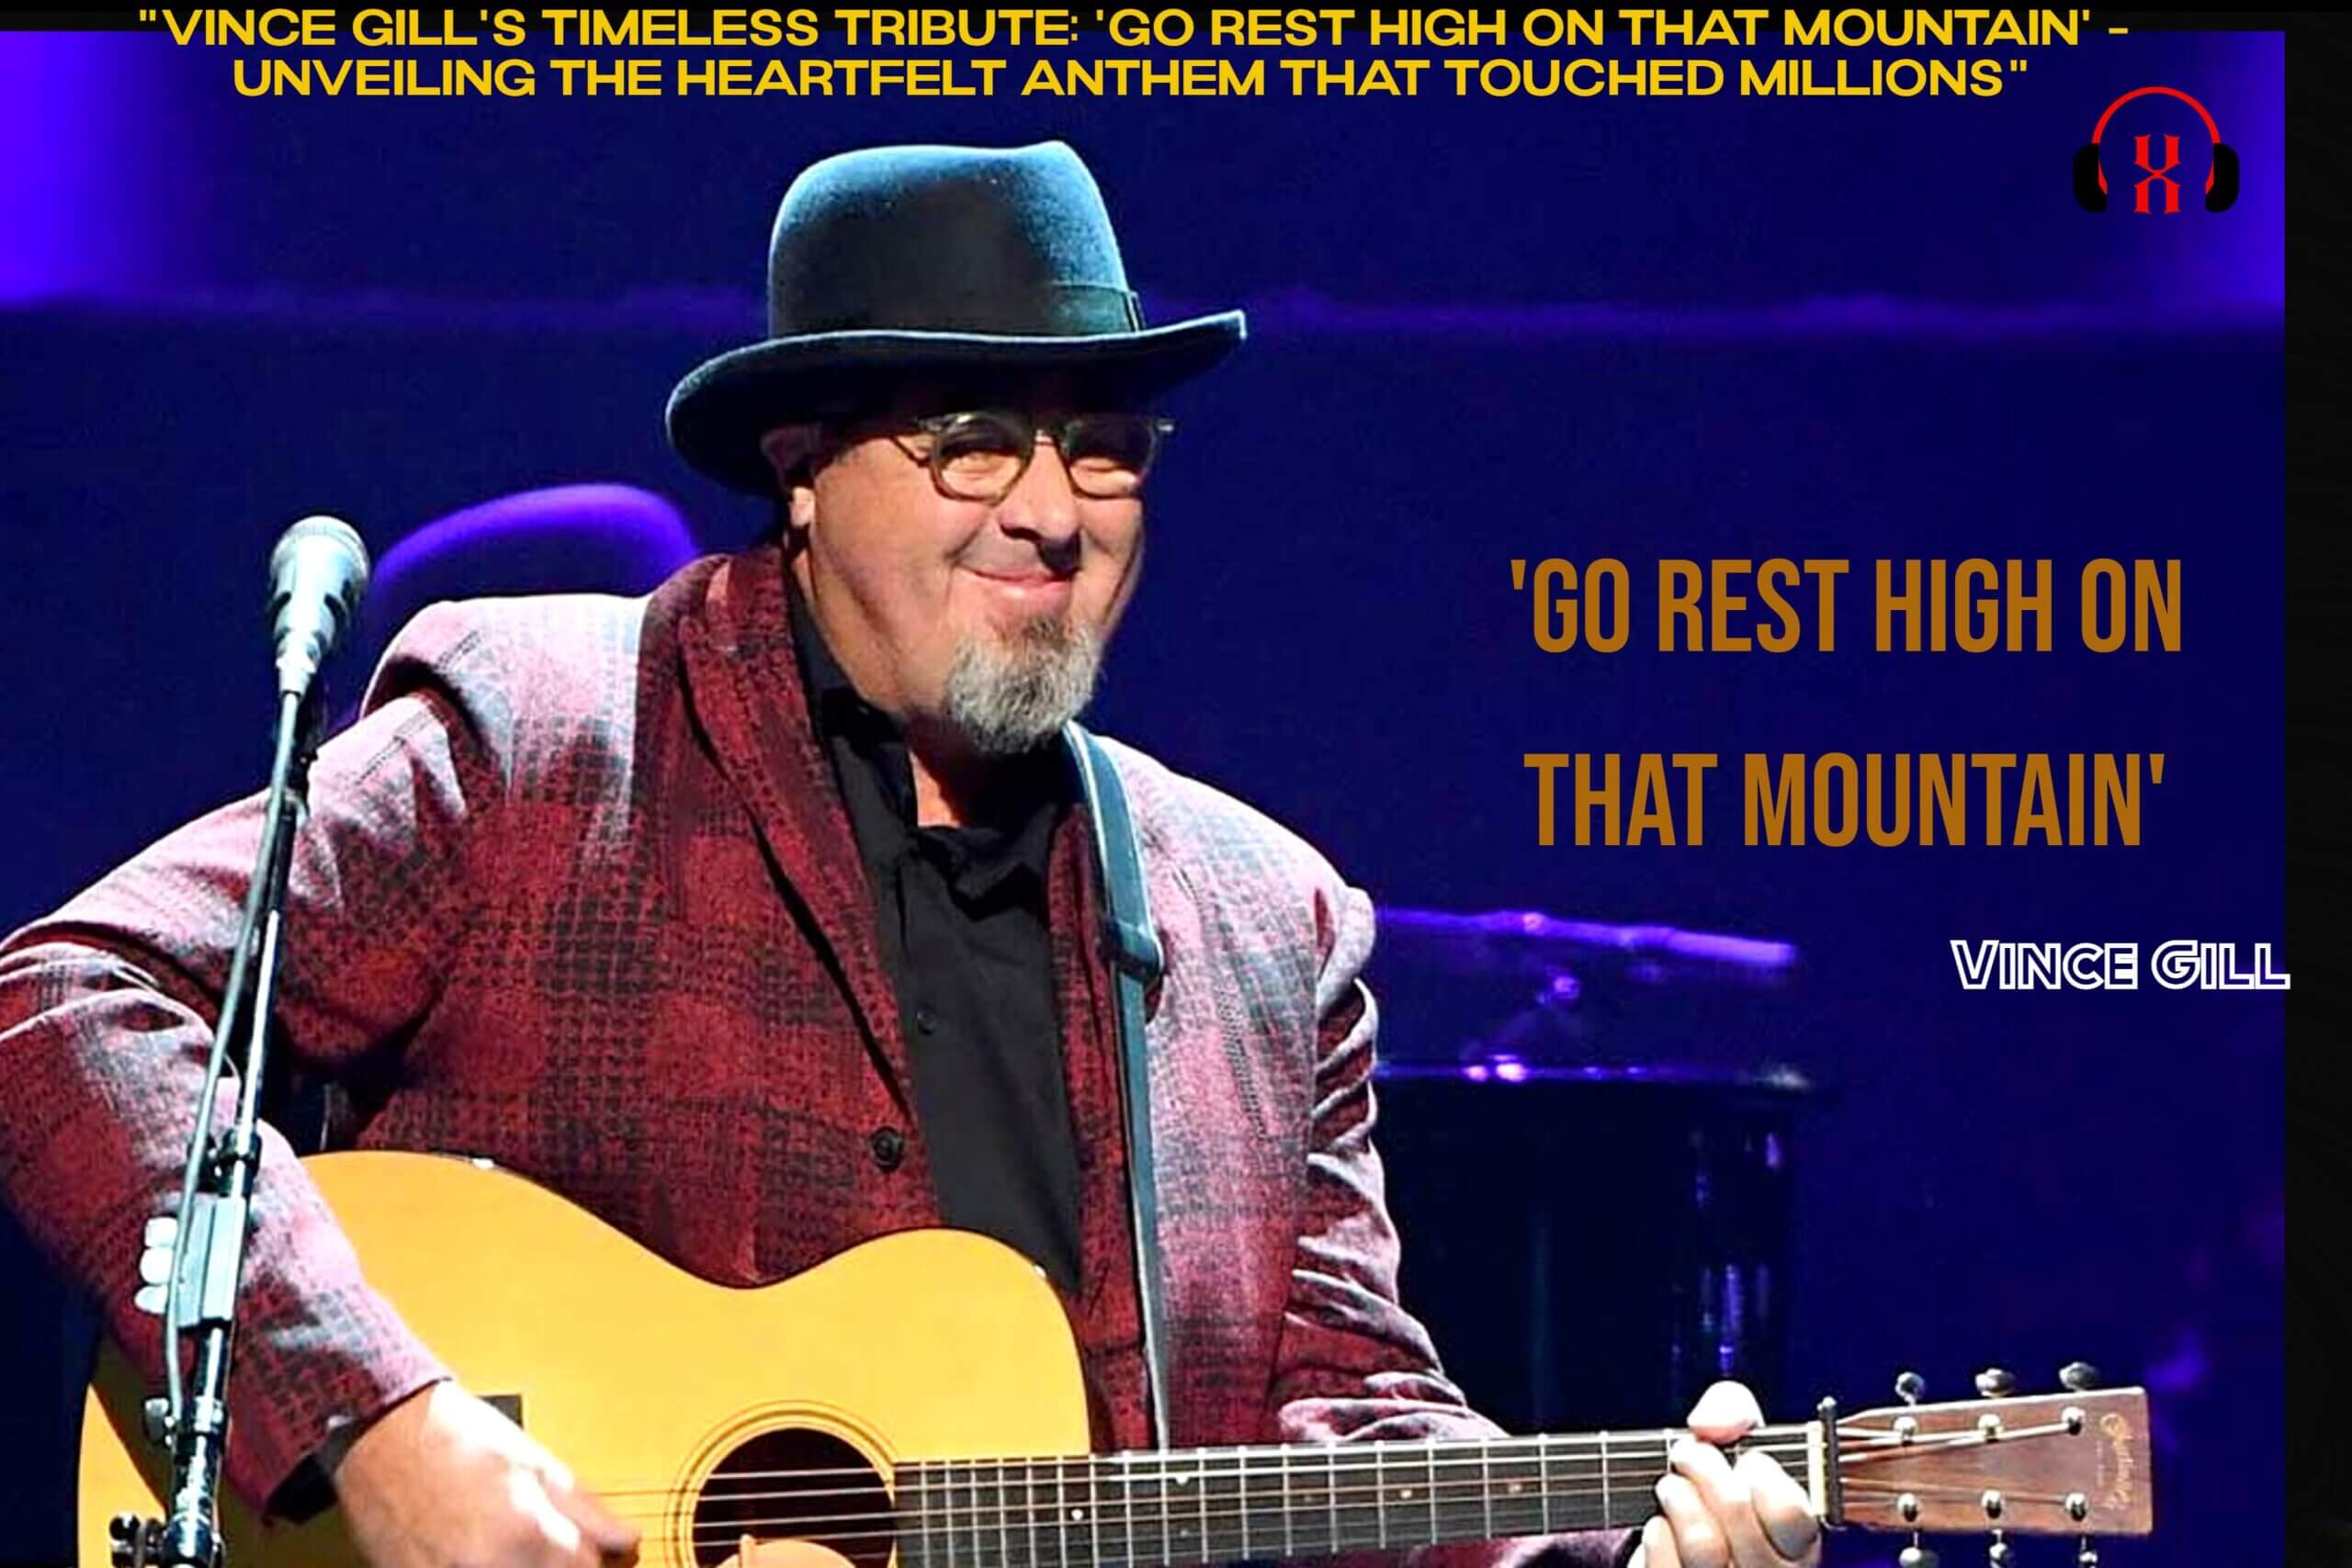 “Vince Gill’s Timeless Tribute: ‘Go Rest High on That Mountain’ – Unveiling the Heartfelt Anthem that Touched Millions”